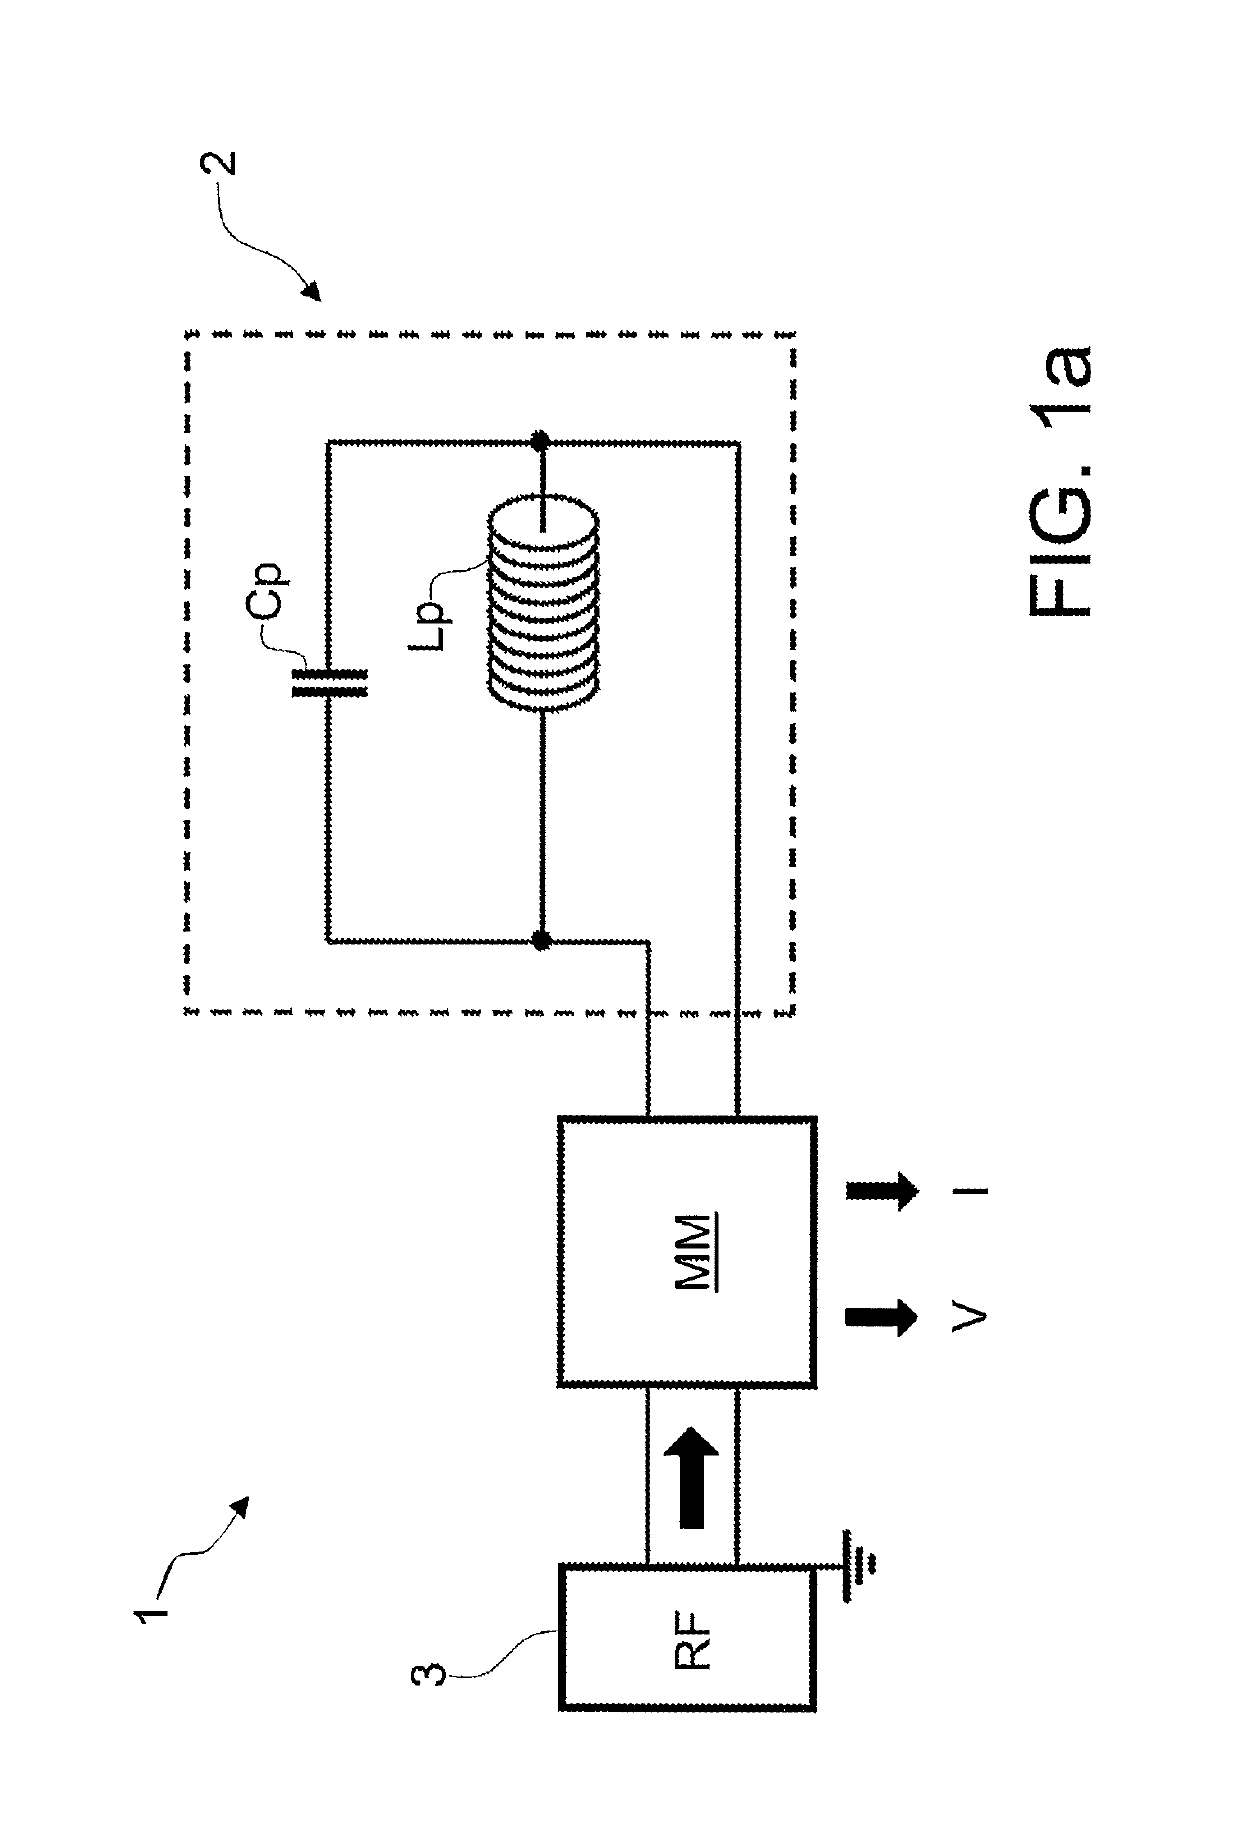 Device intrinsically designed to resonate, suitable for RF power transfer as well as group including such device and usable for the production of plasma